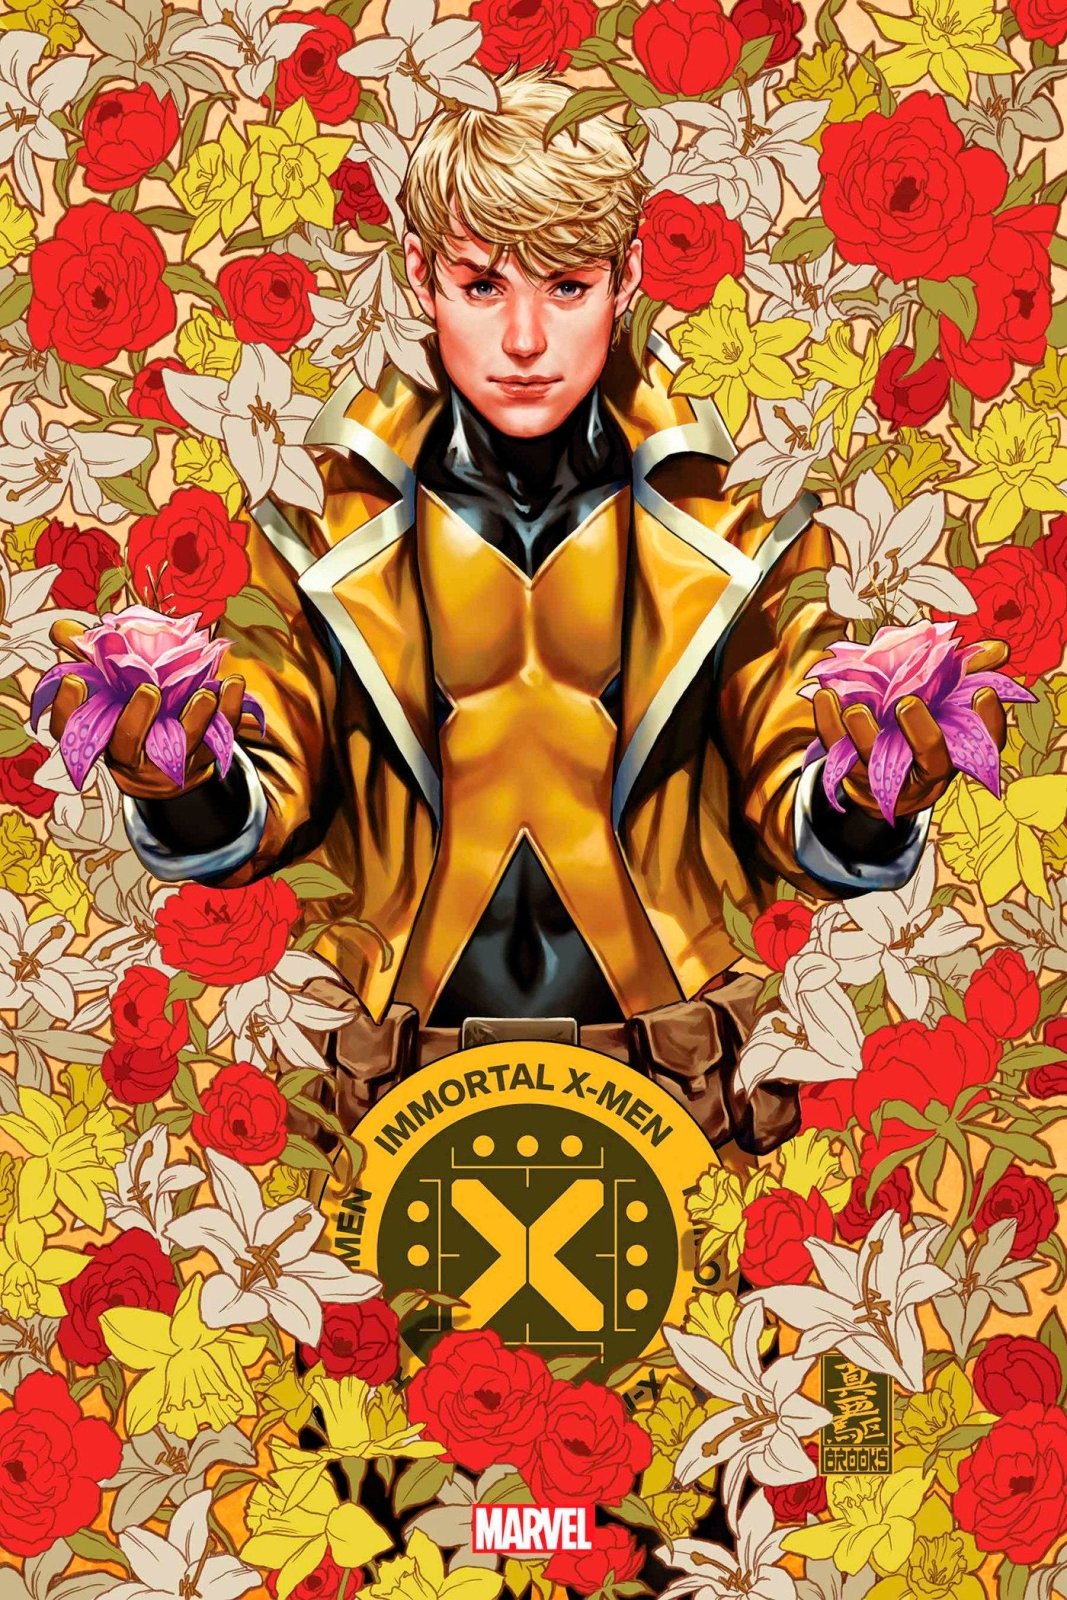 Immortal X-Men 13 - The Fourth Place